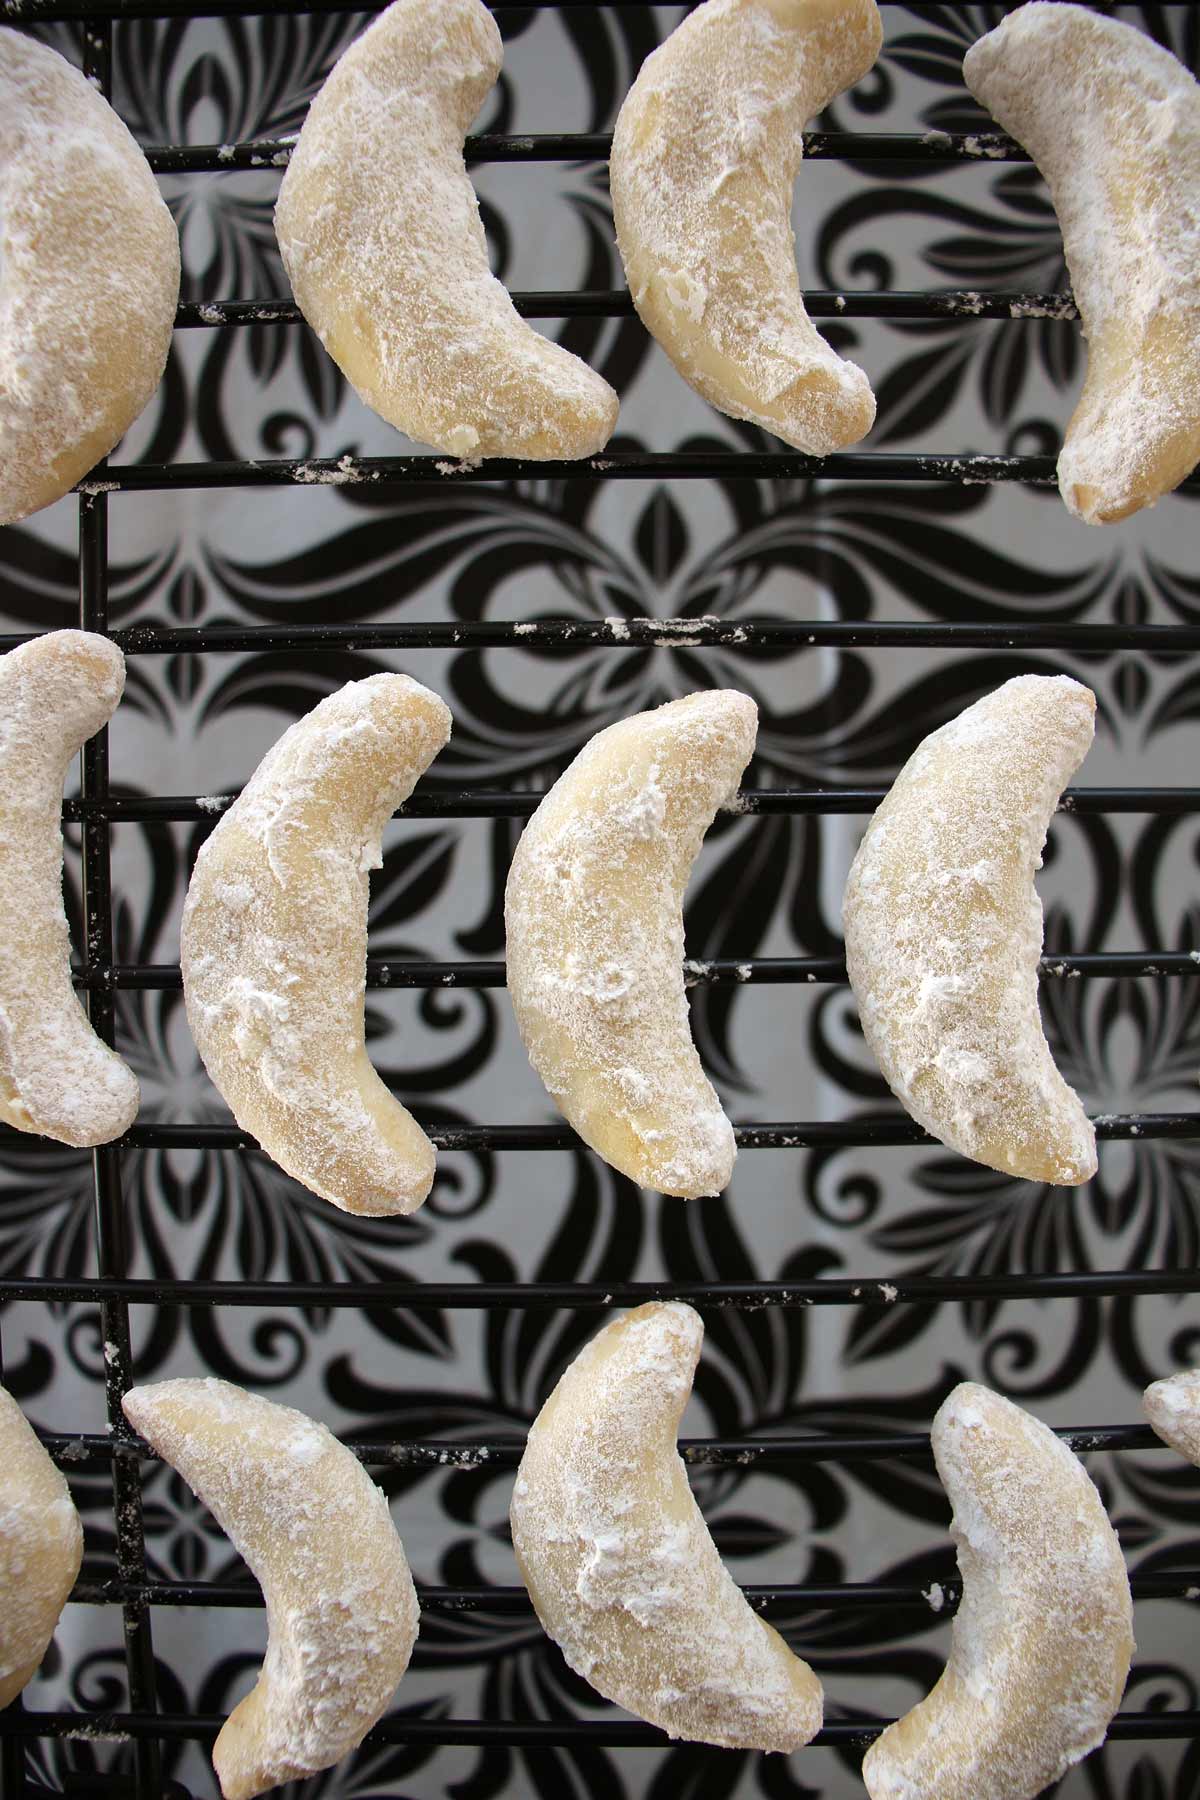 Powdered sugar dusted crescent cookies arranged on a wire cooling rack.